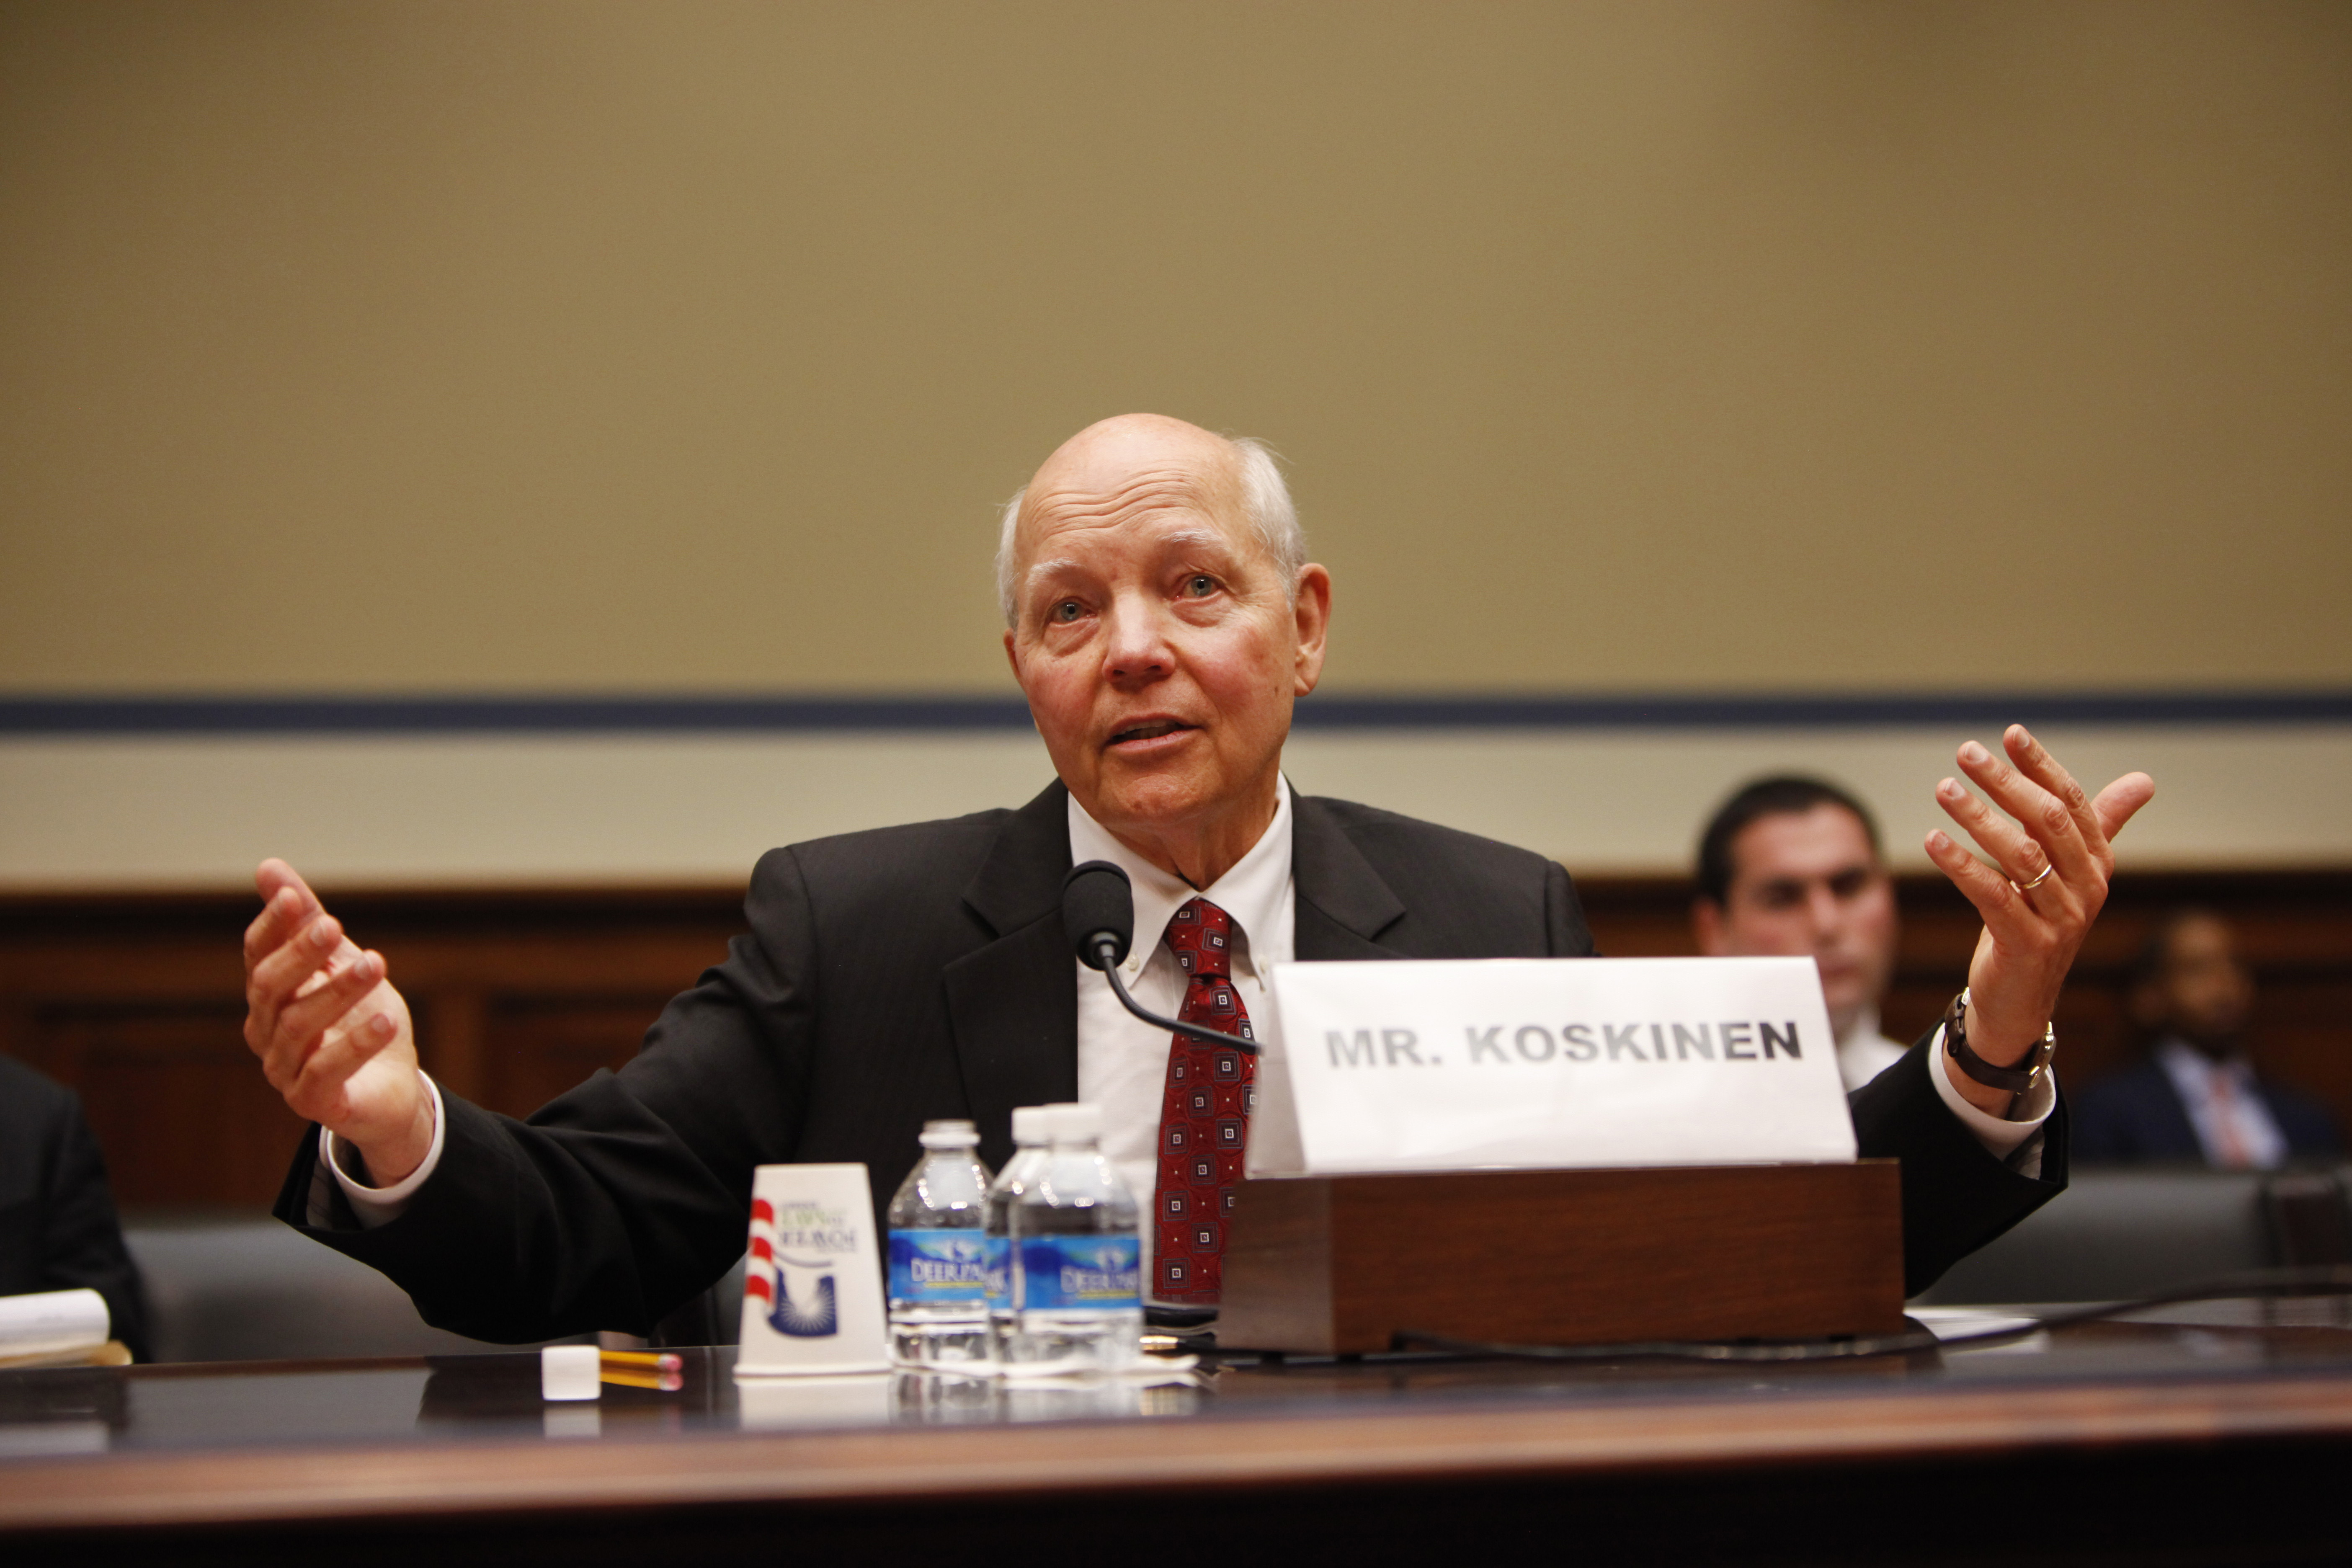 The IRS Targeting Scandal: Changing Stories of Missing E-mails